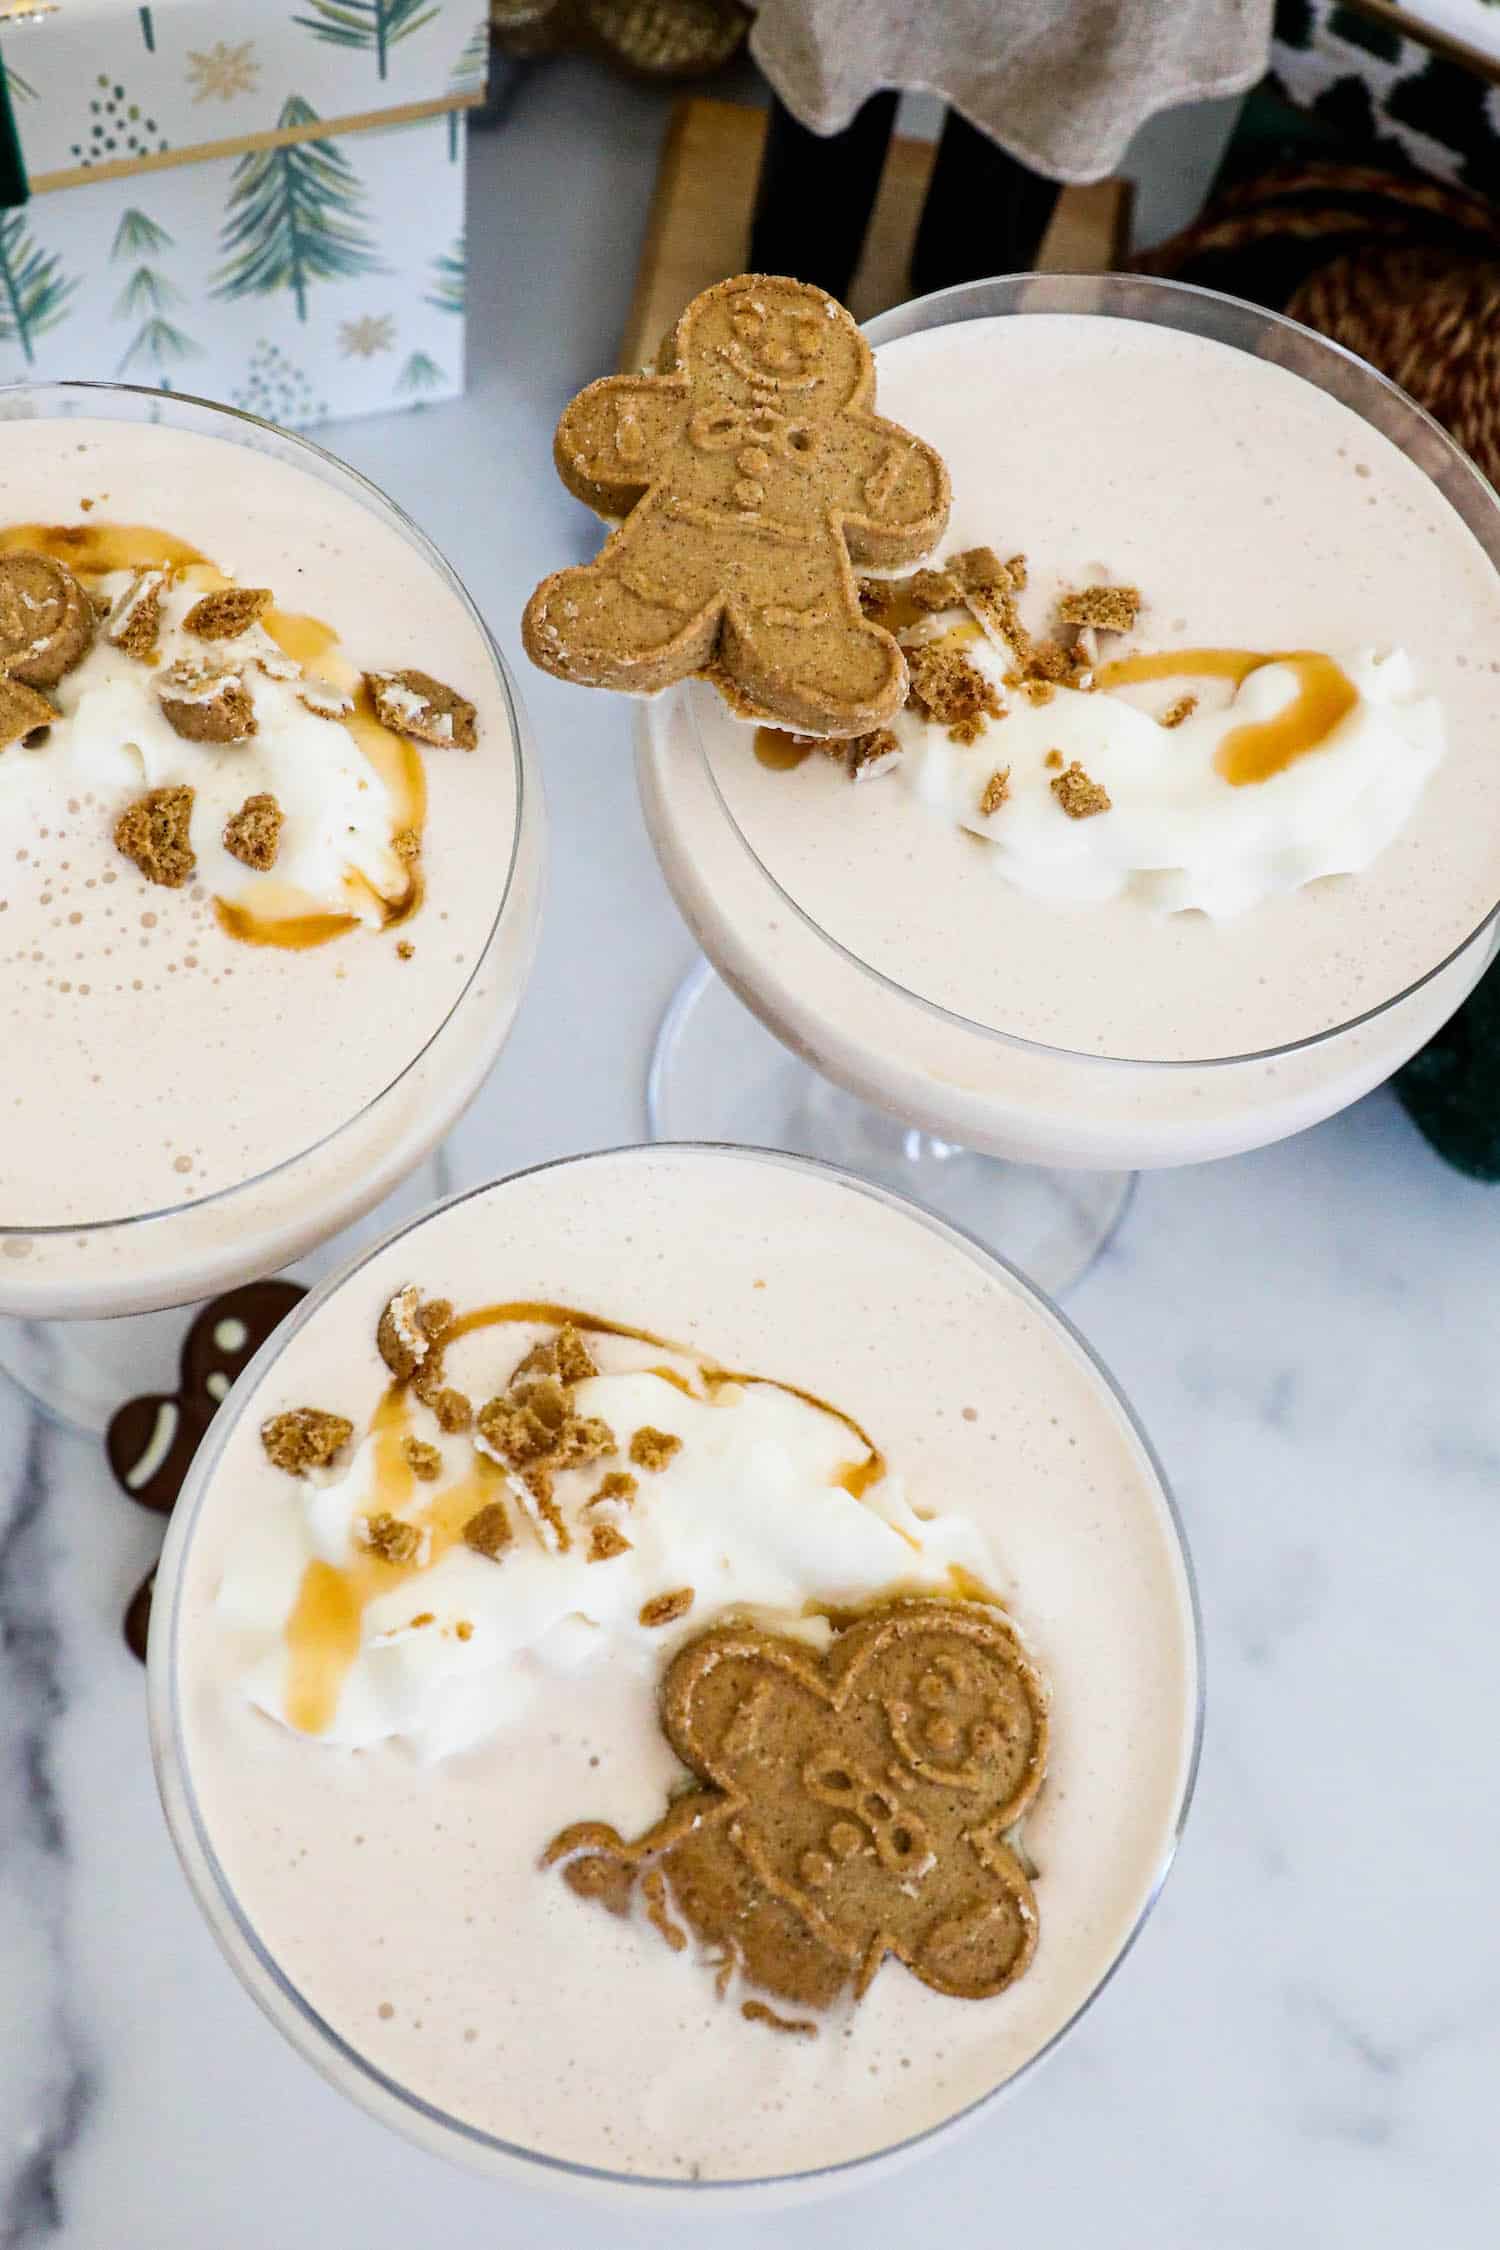 Three glasses of gingerbread iced tea with whipped cream and gingerbread cookies, garnished with a Gingerbread Martini.